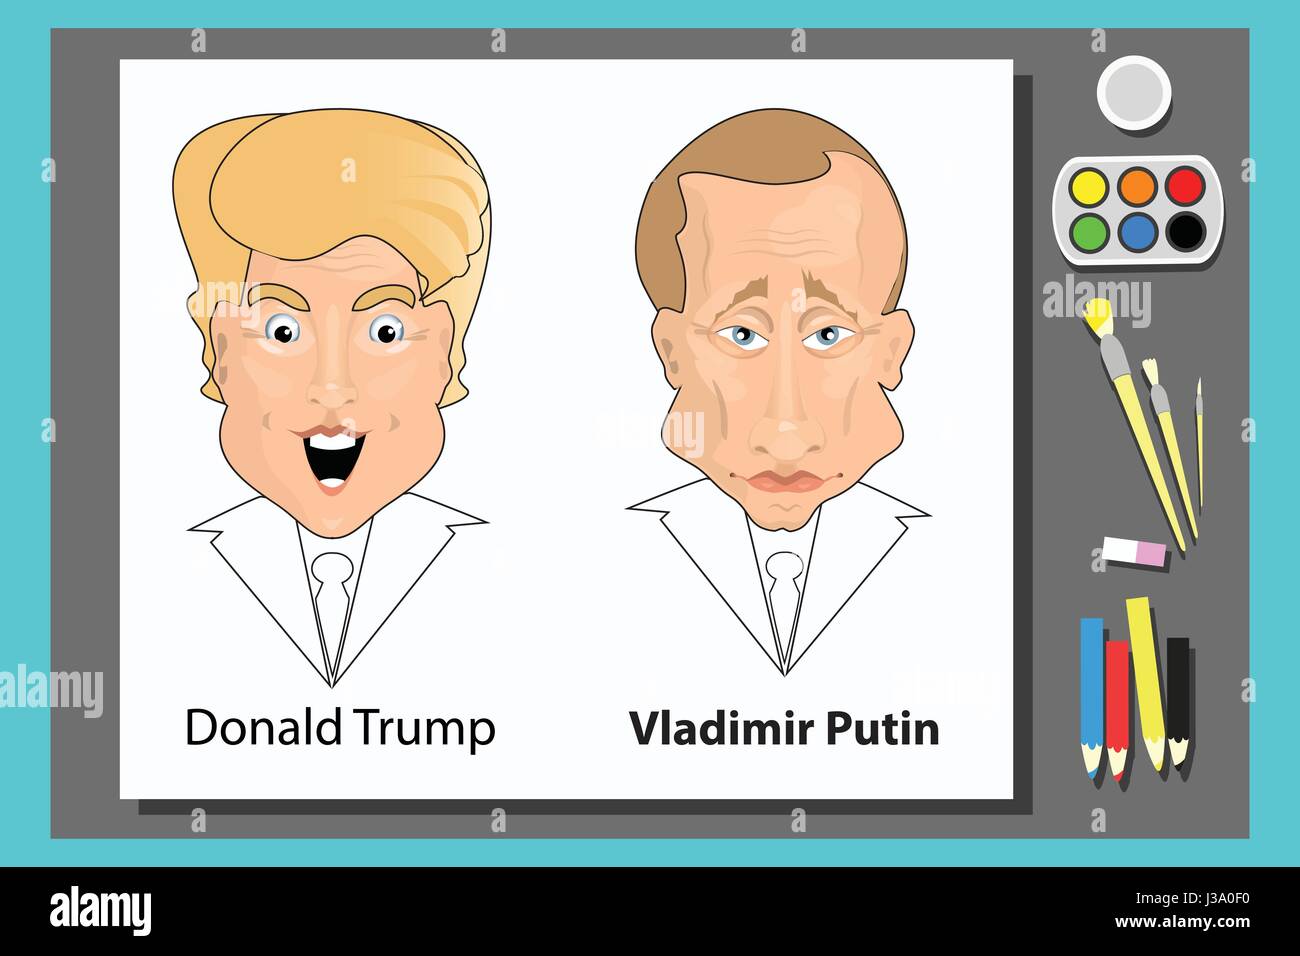 Donald Trump President of the United States and Putin Vladimir of Russia. Illustration for your design. On canvas with paints and brushes. drawing Stock Vector